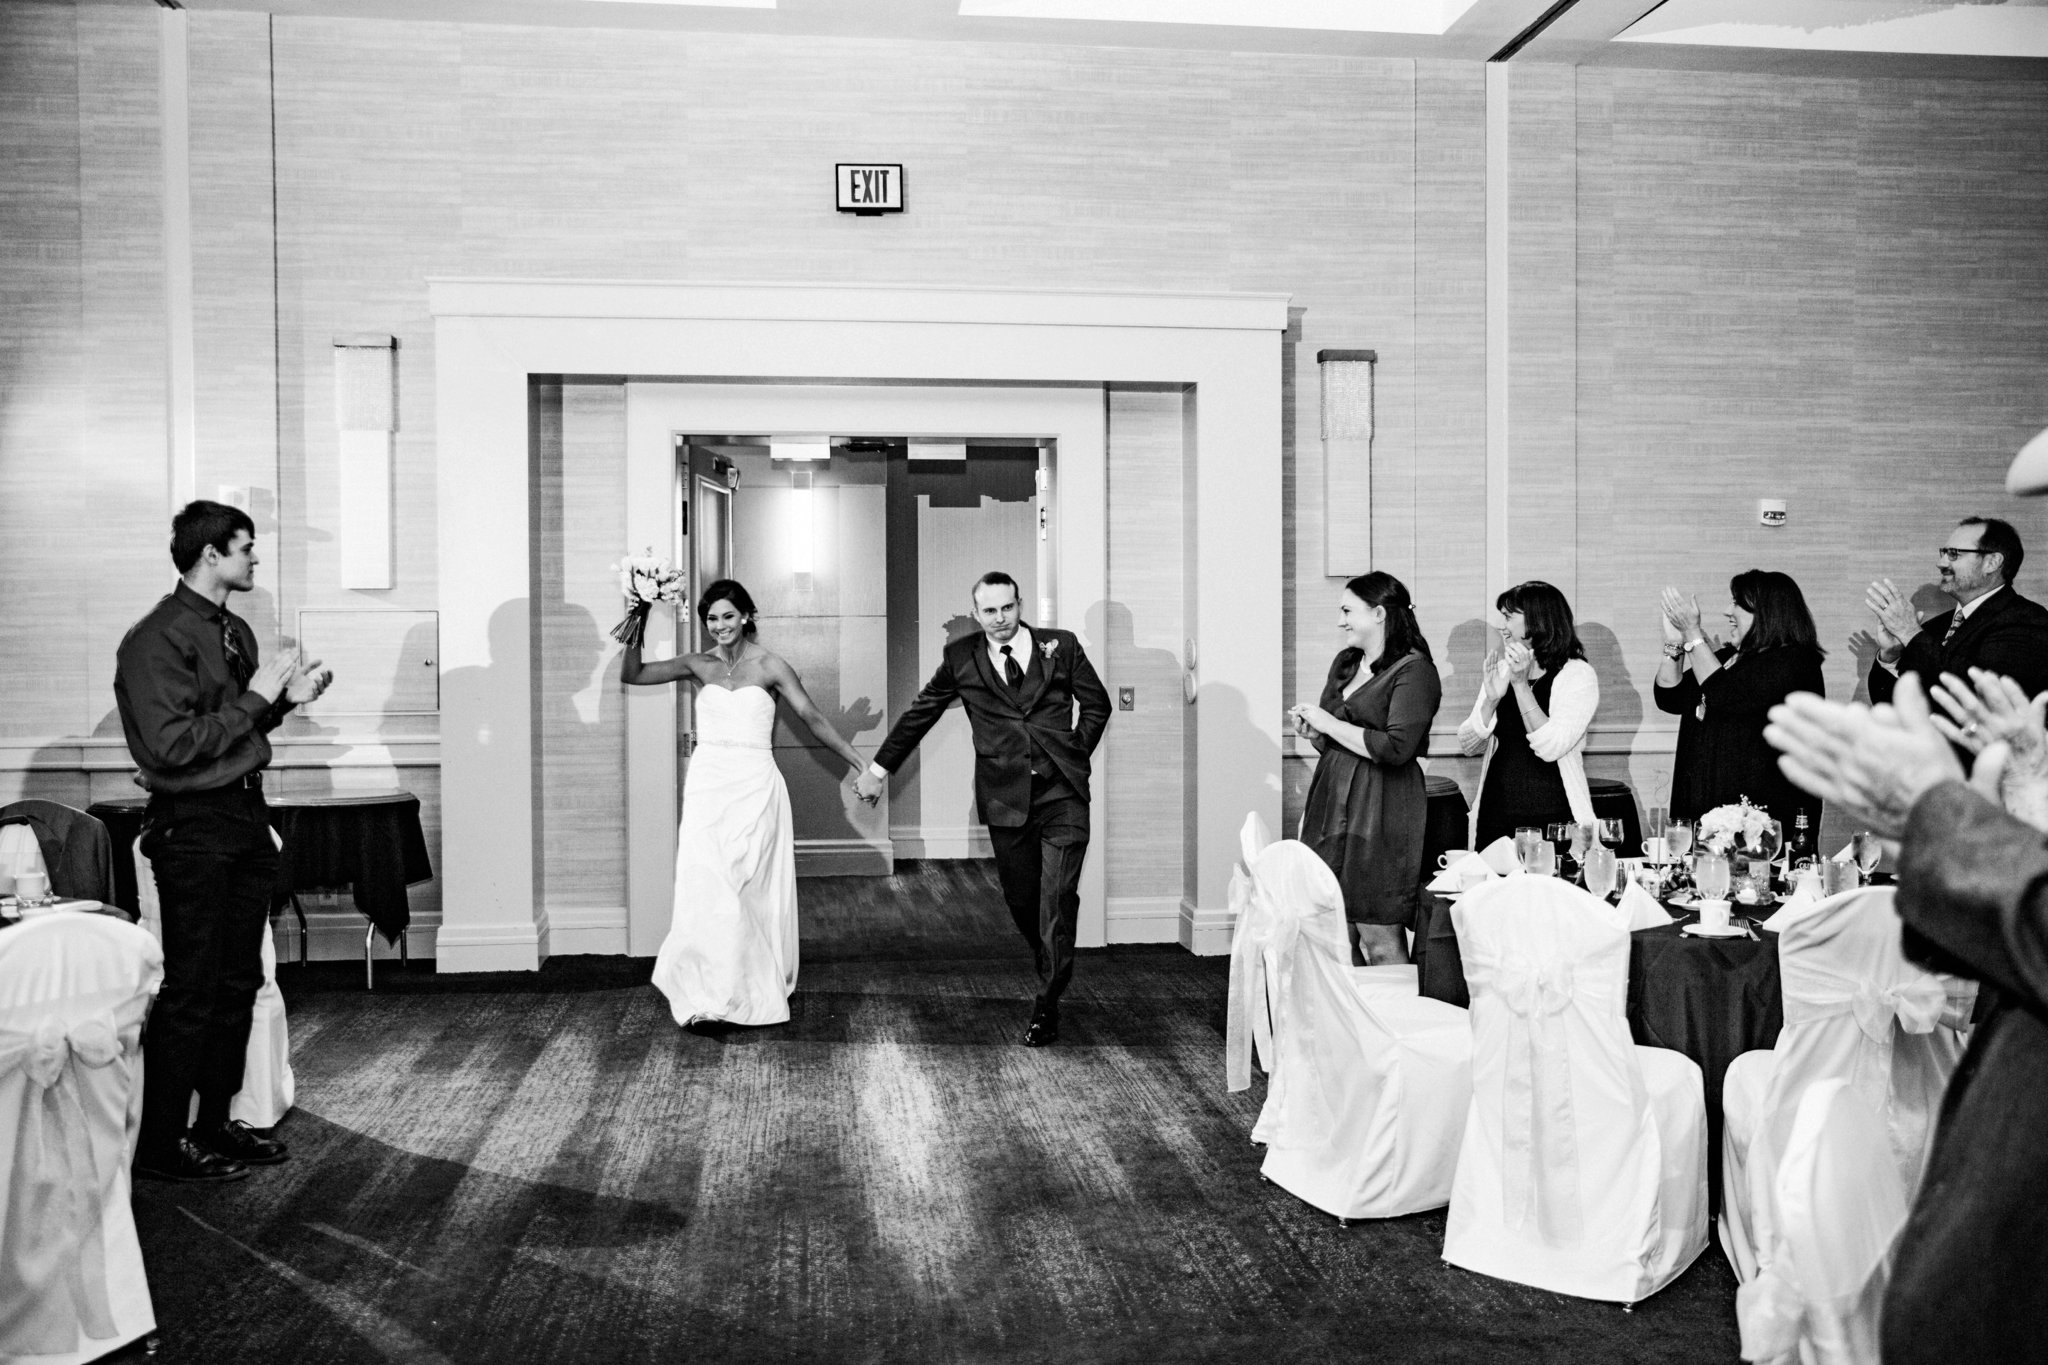 black and white | wedding | wedding photos | wedding photography | images by feliciathephotographer.com | Country Club Plaza | Kansas City | The Marriott | Unity Temple | reception venue | bride and groom entrance | Mr. and Mrs. 